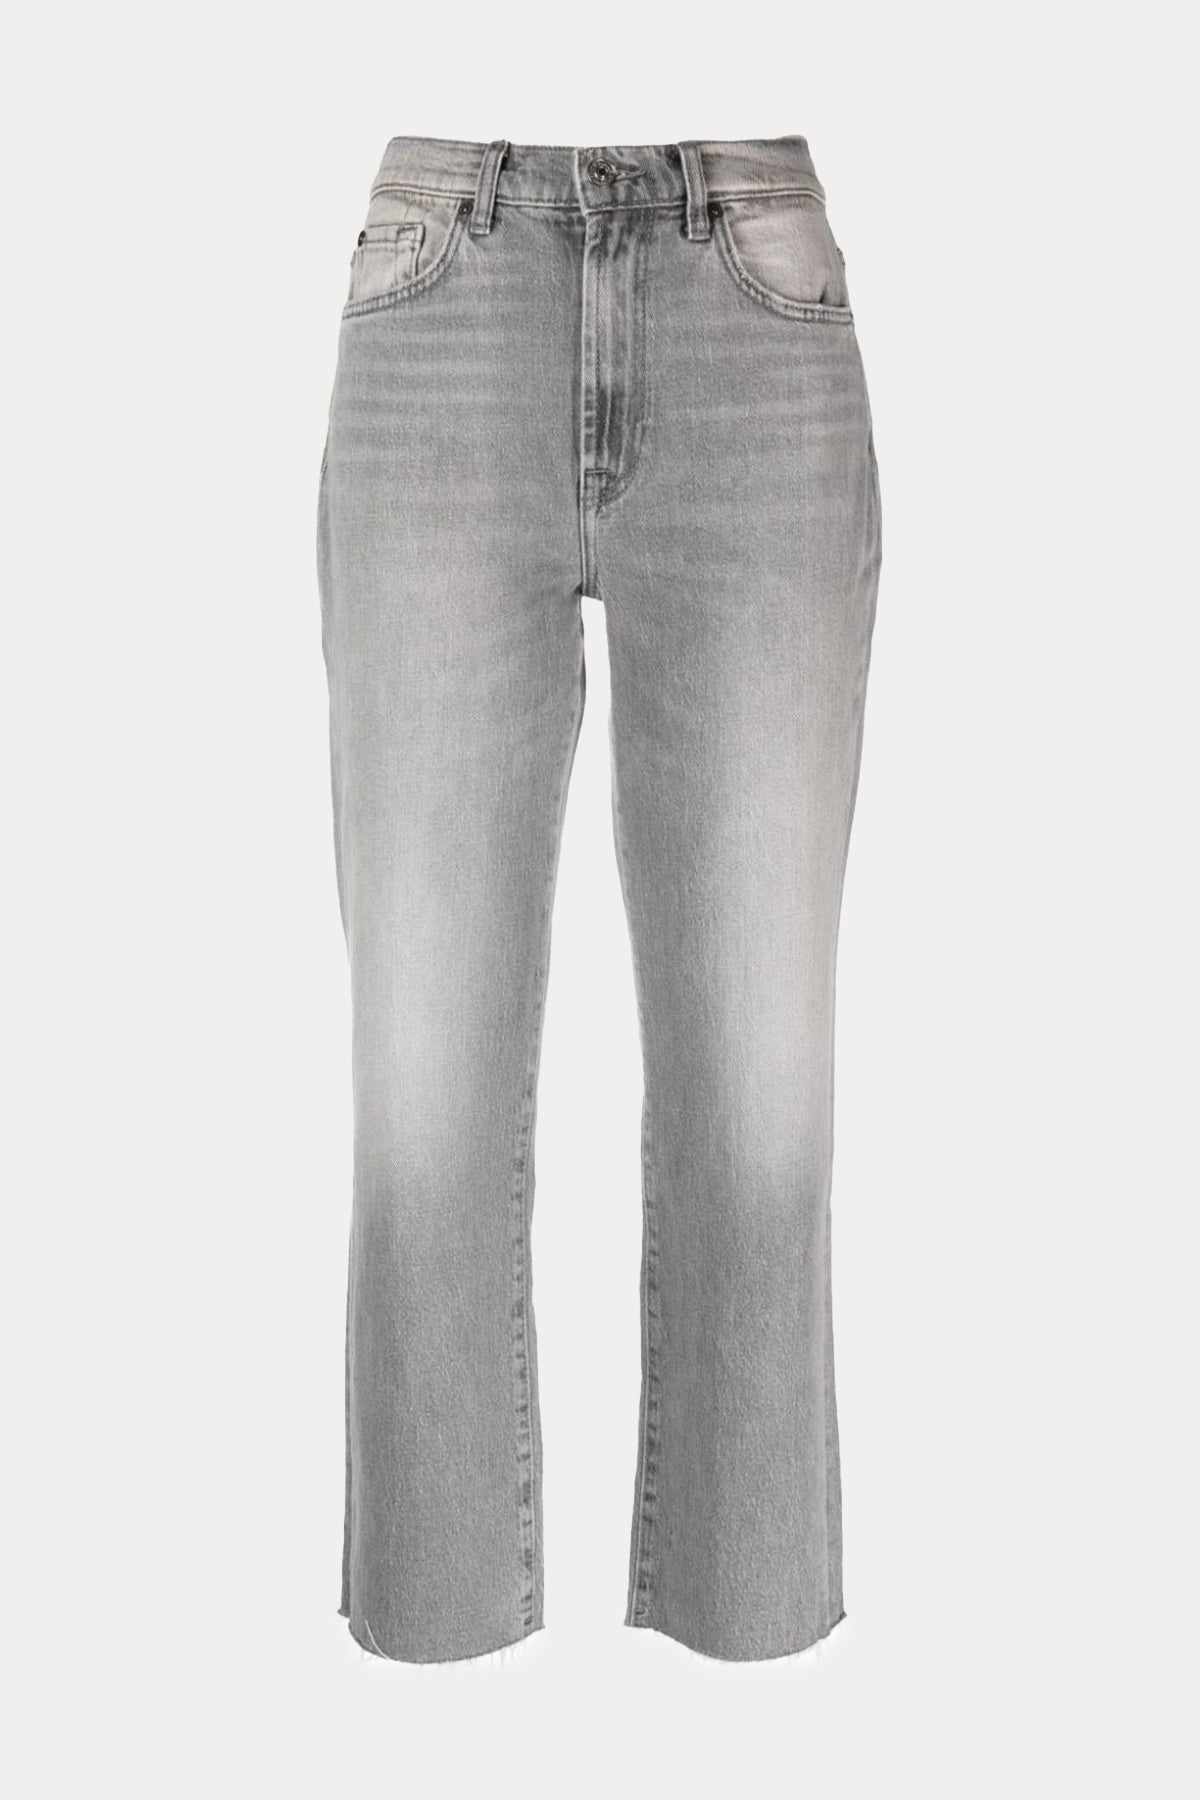 7 For All Mankind Logan Straight Fit Jeans-Libas Trendy Fashion Store